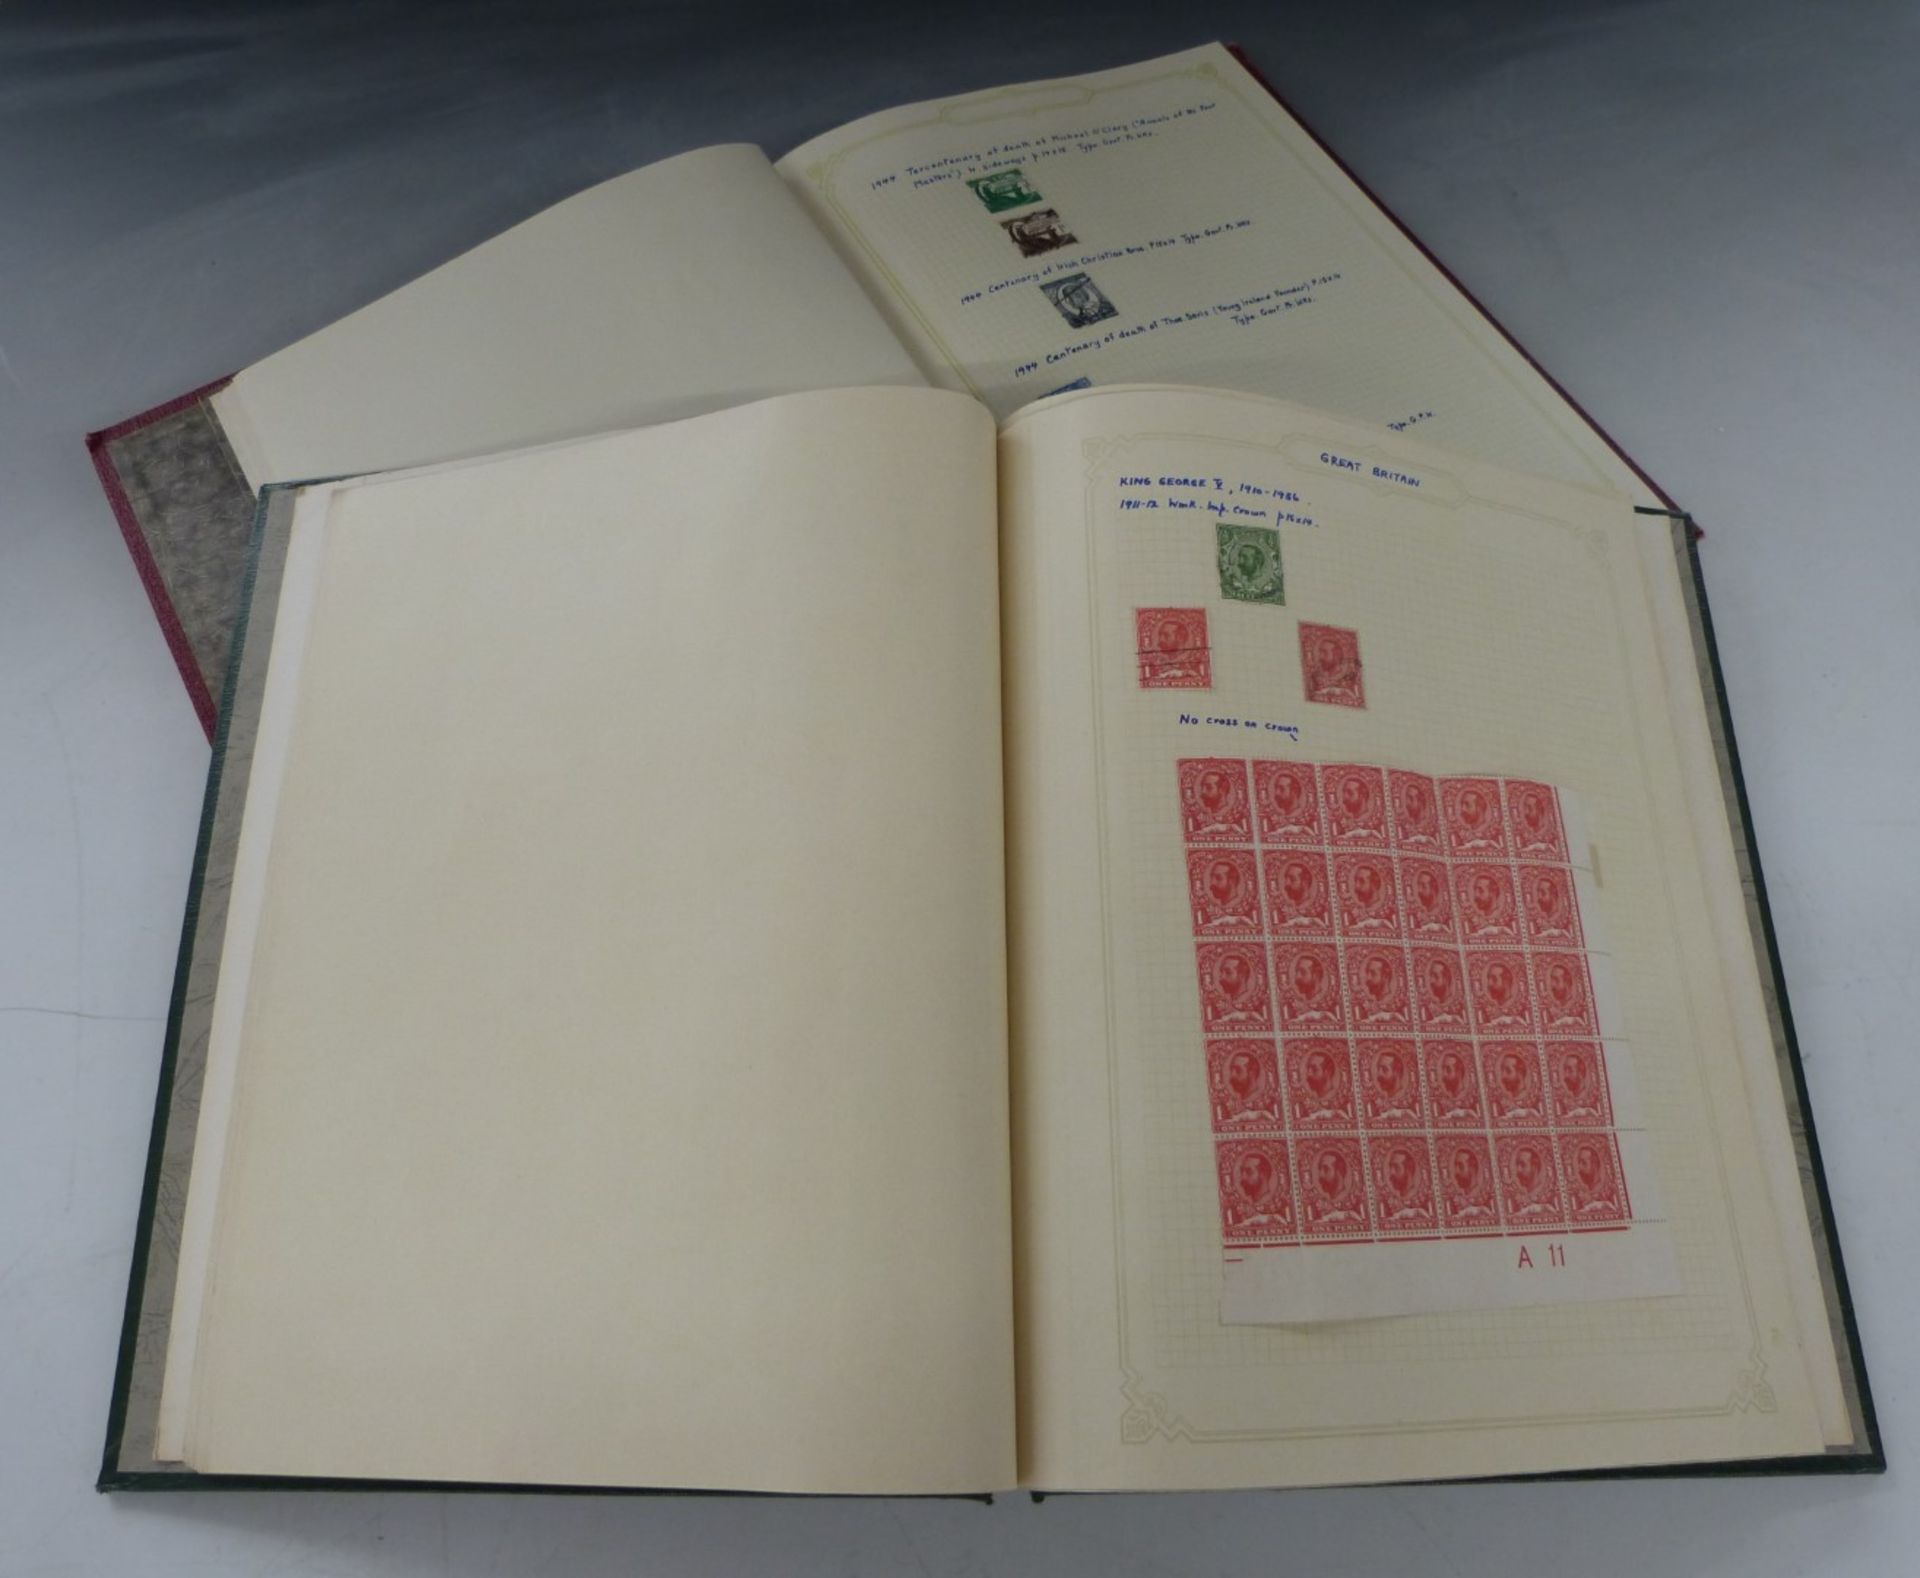 Two Simplex stamp albums of GB Channel Islands and Ireland (Eire) postage stamps, all reigns